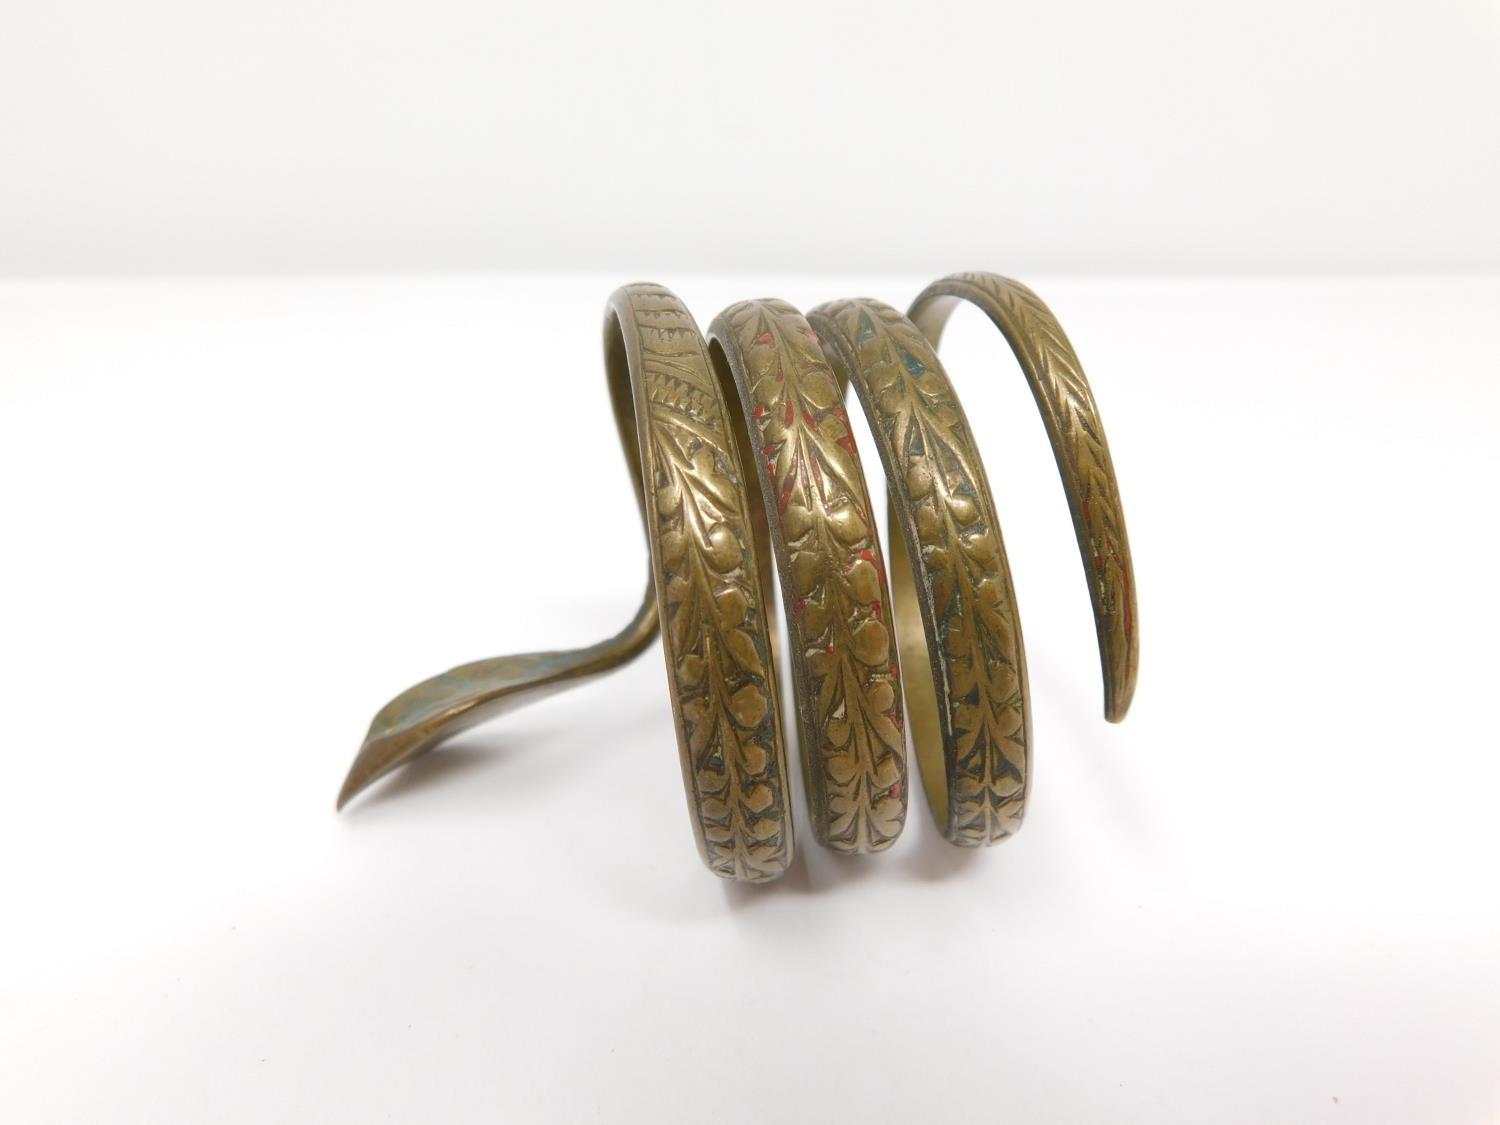 A collection of vintage jewellery inlcuding an 18 carat rolled gold bangle with star cur design, a - Image 14 of 28